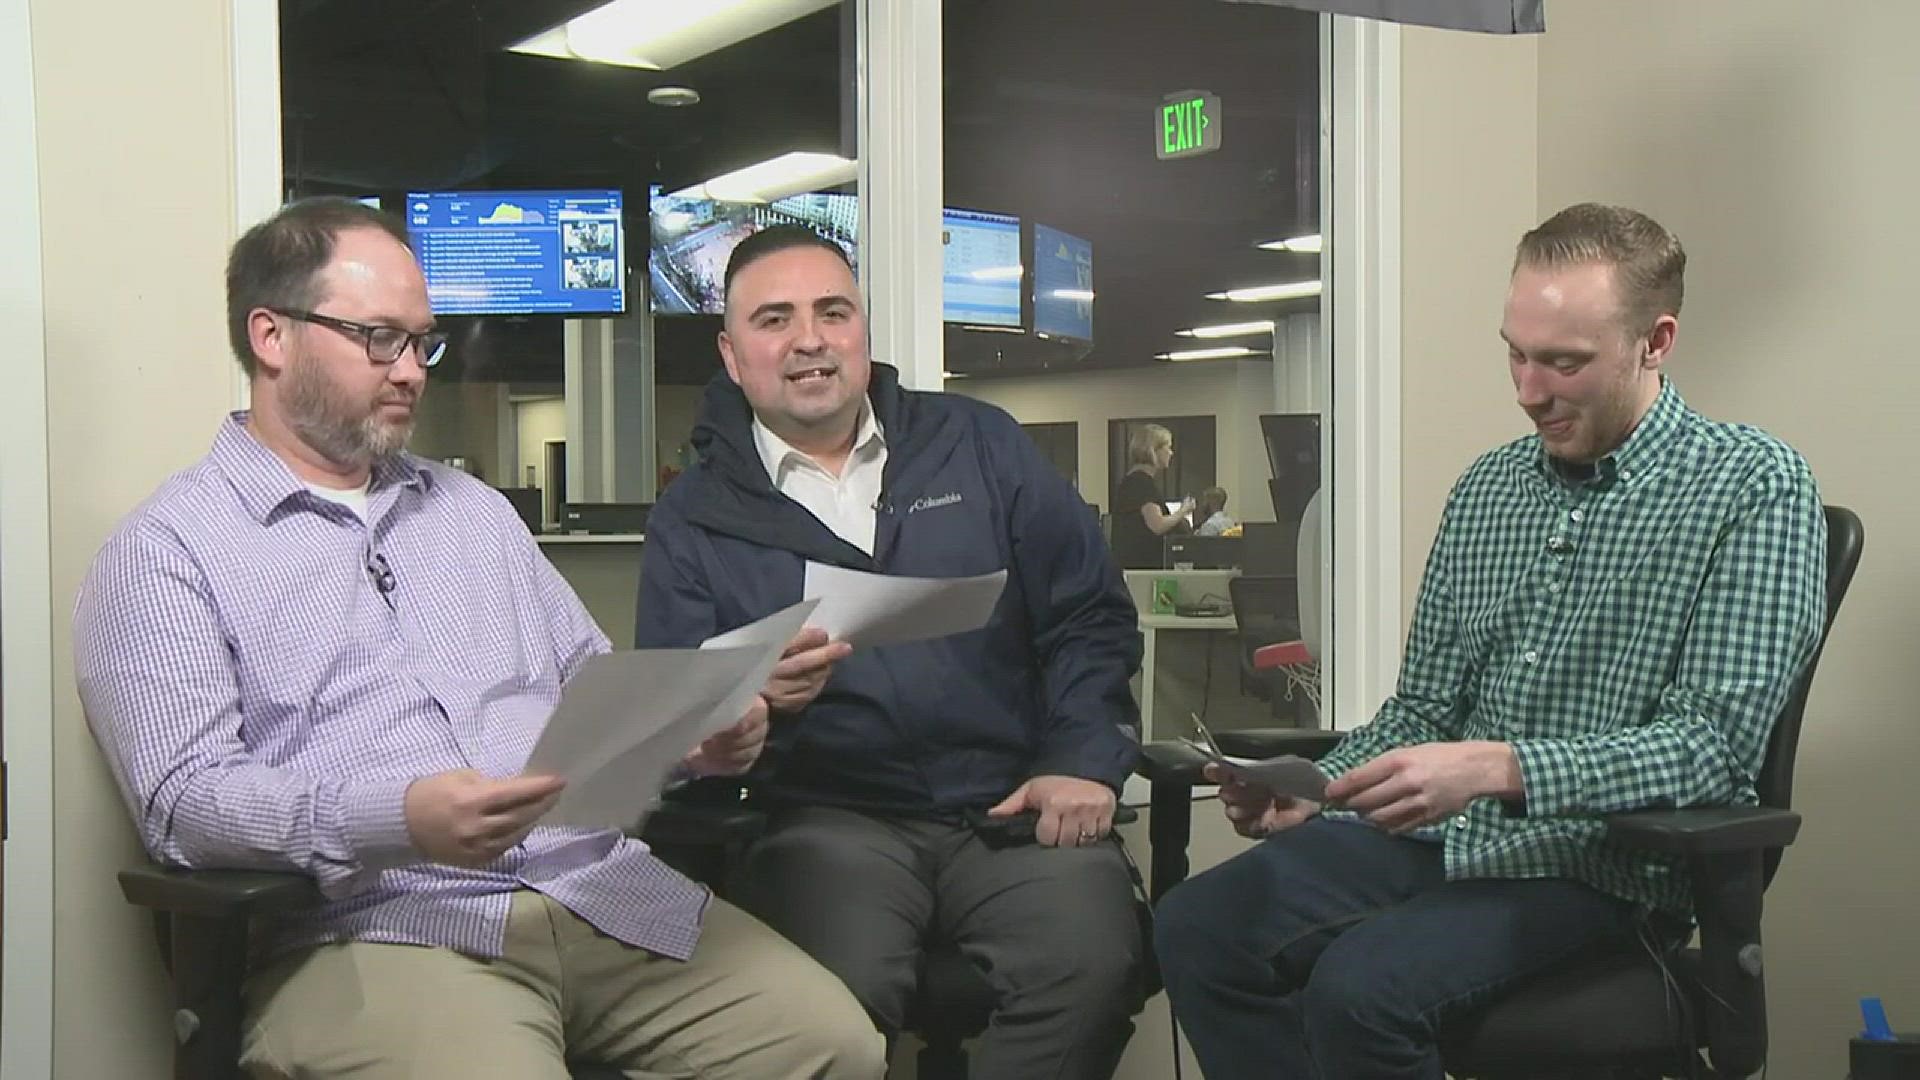 KGW's Jared Cowley, Orlando Sanchez and Nate Hanson debate whether the Blazers will beat the Warriors when Golden State visits Portland on Friday night.